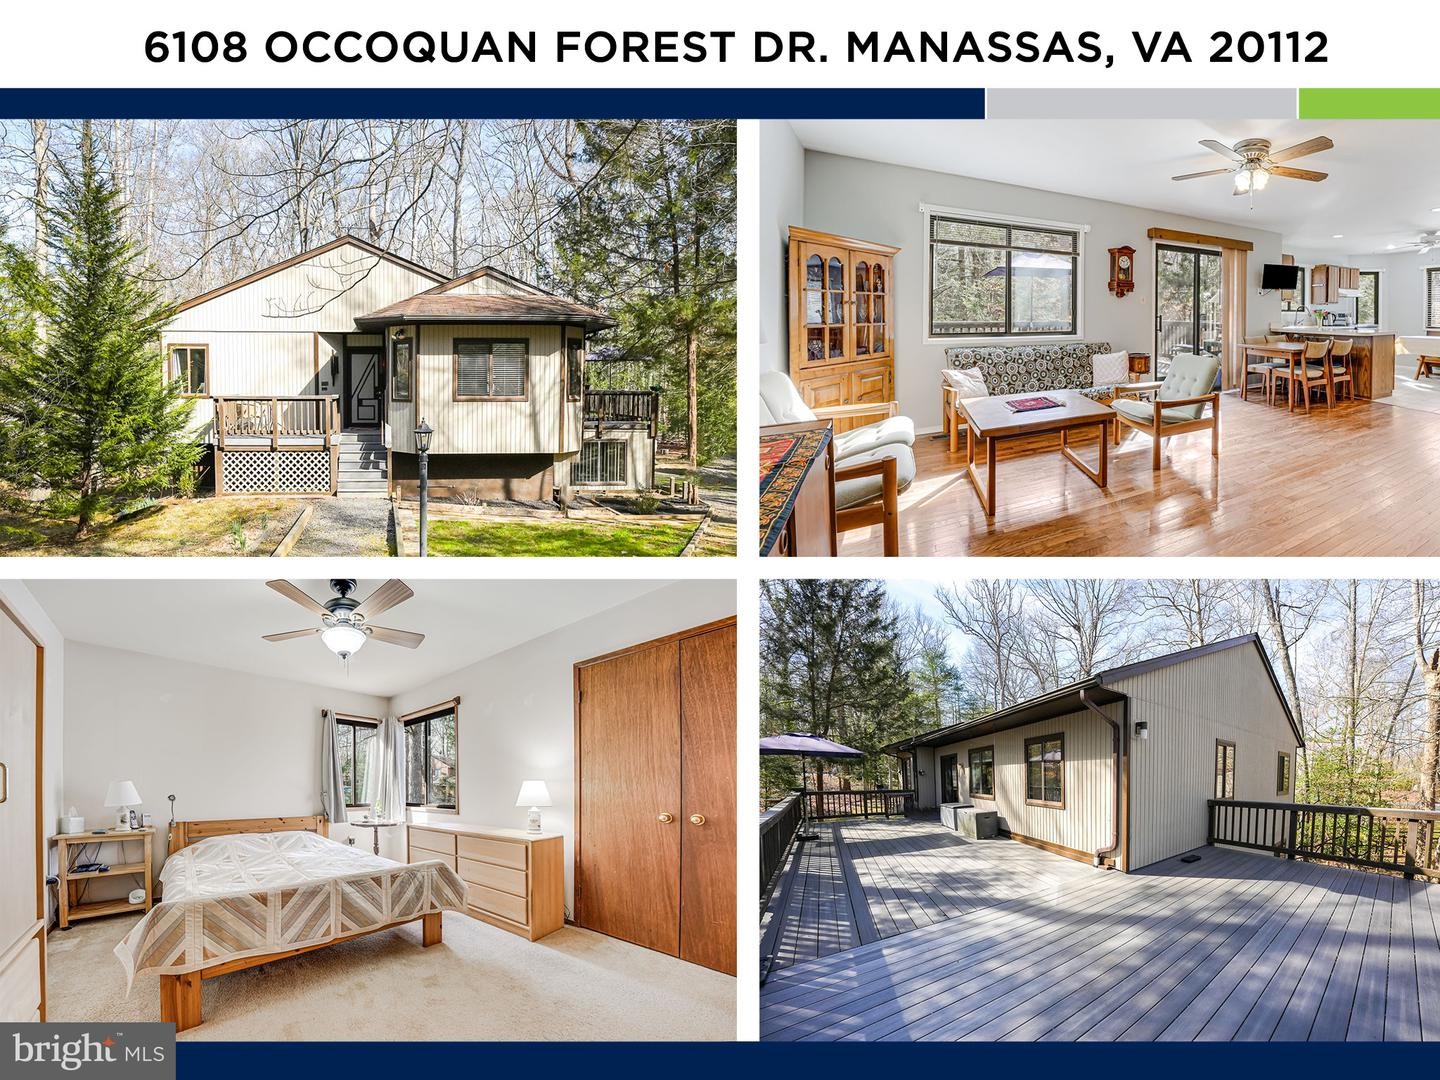 1. 6108 Occoquan Forest Dr